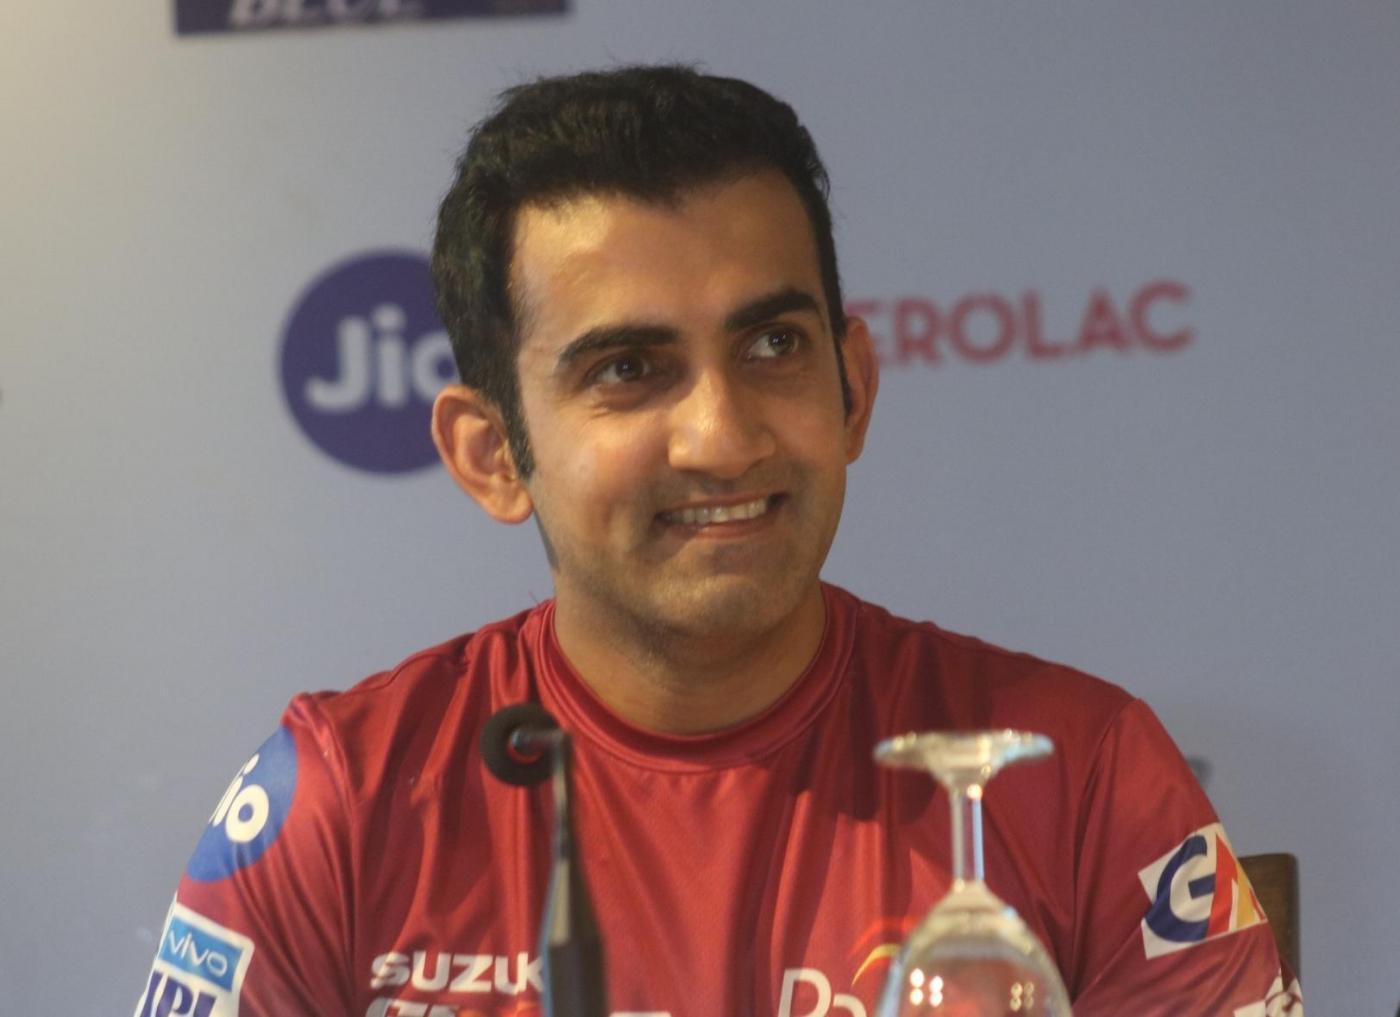 New Delhi: Delhi Daredevils captain Gautam Gambhir during a press conference at the launch of the team's anthem ahead of IPL 2018, in New Delhi on April 5, 2018. (Photo: IANS) by .